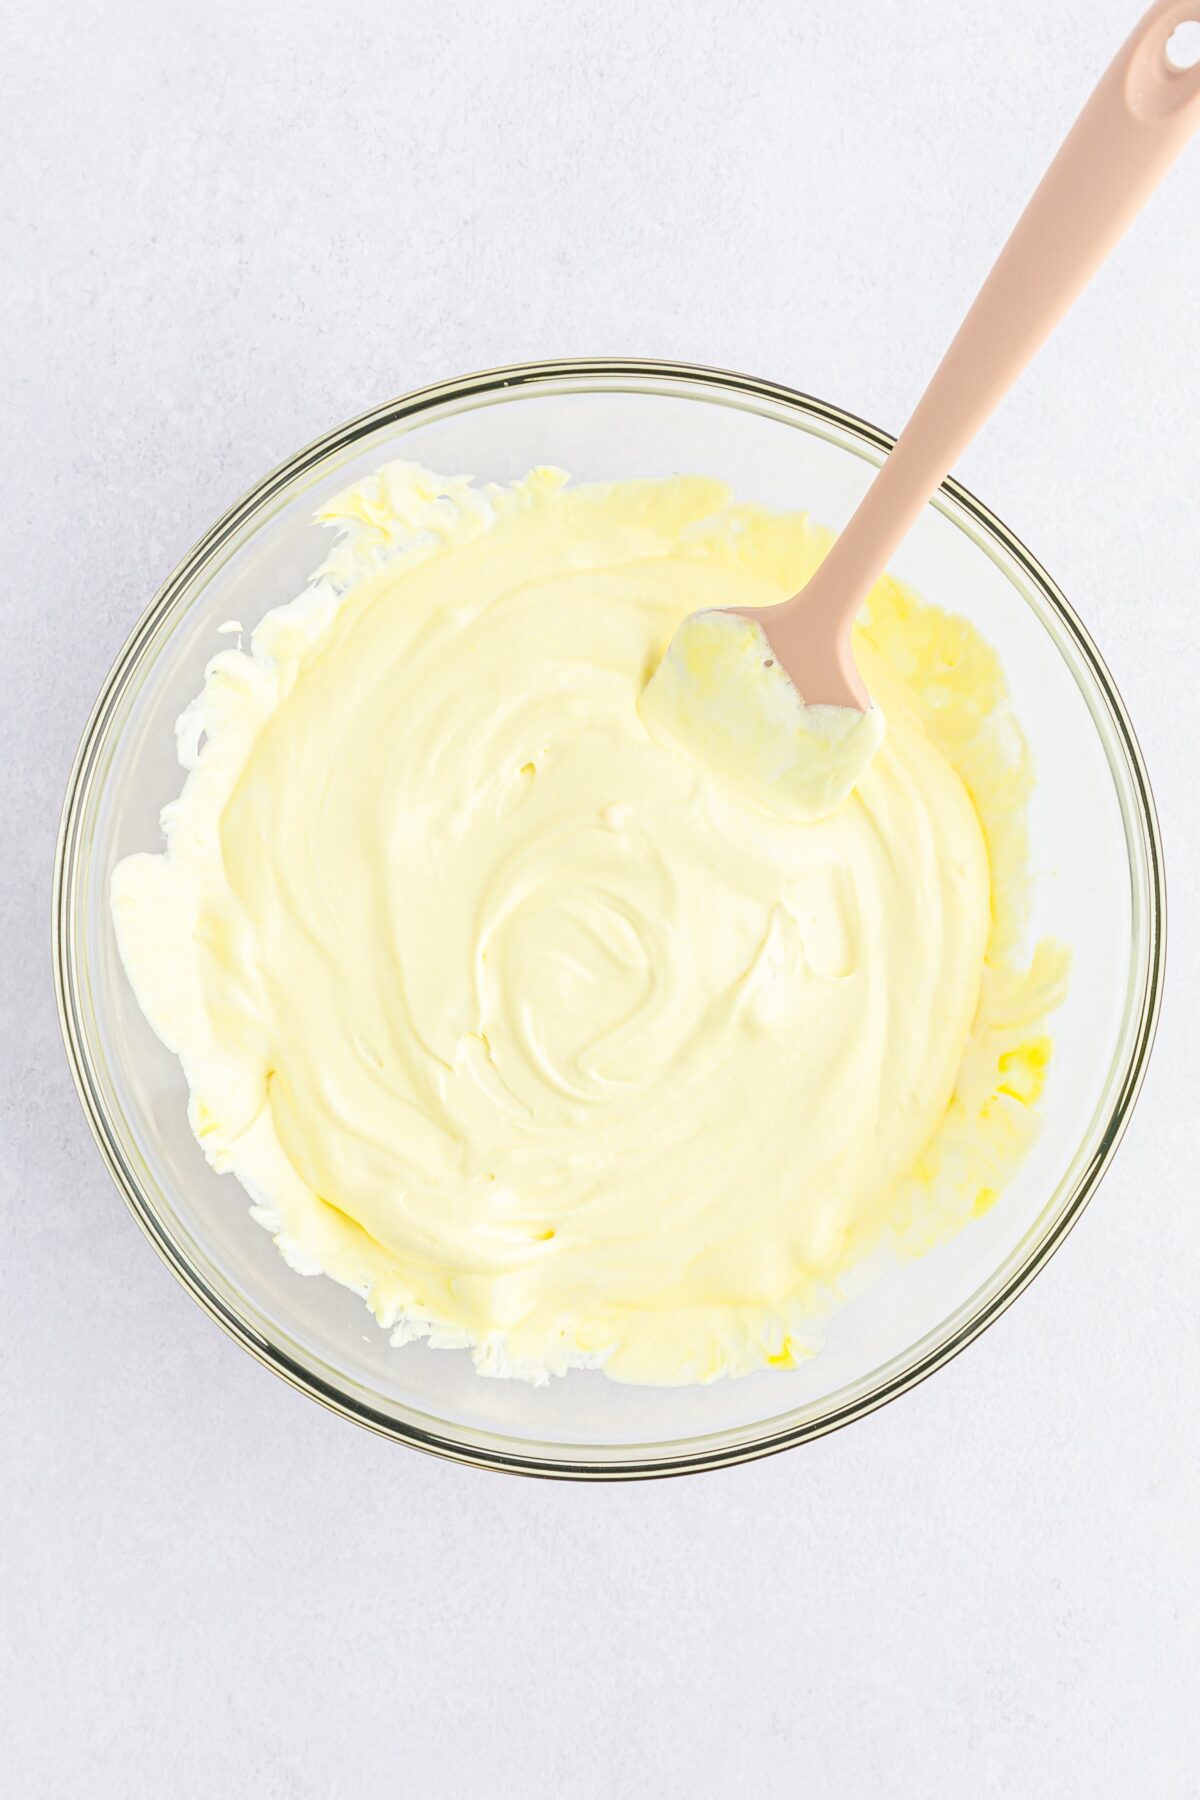 Cool whip combined with the lemon pudding mixture.